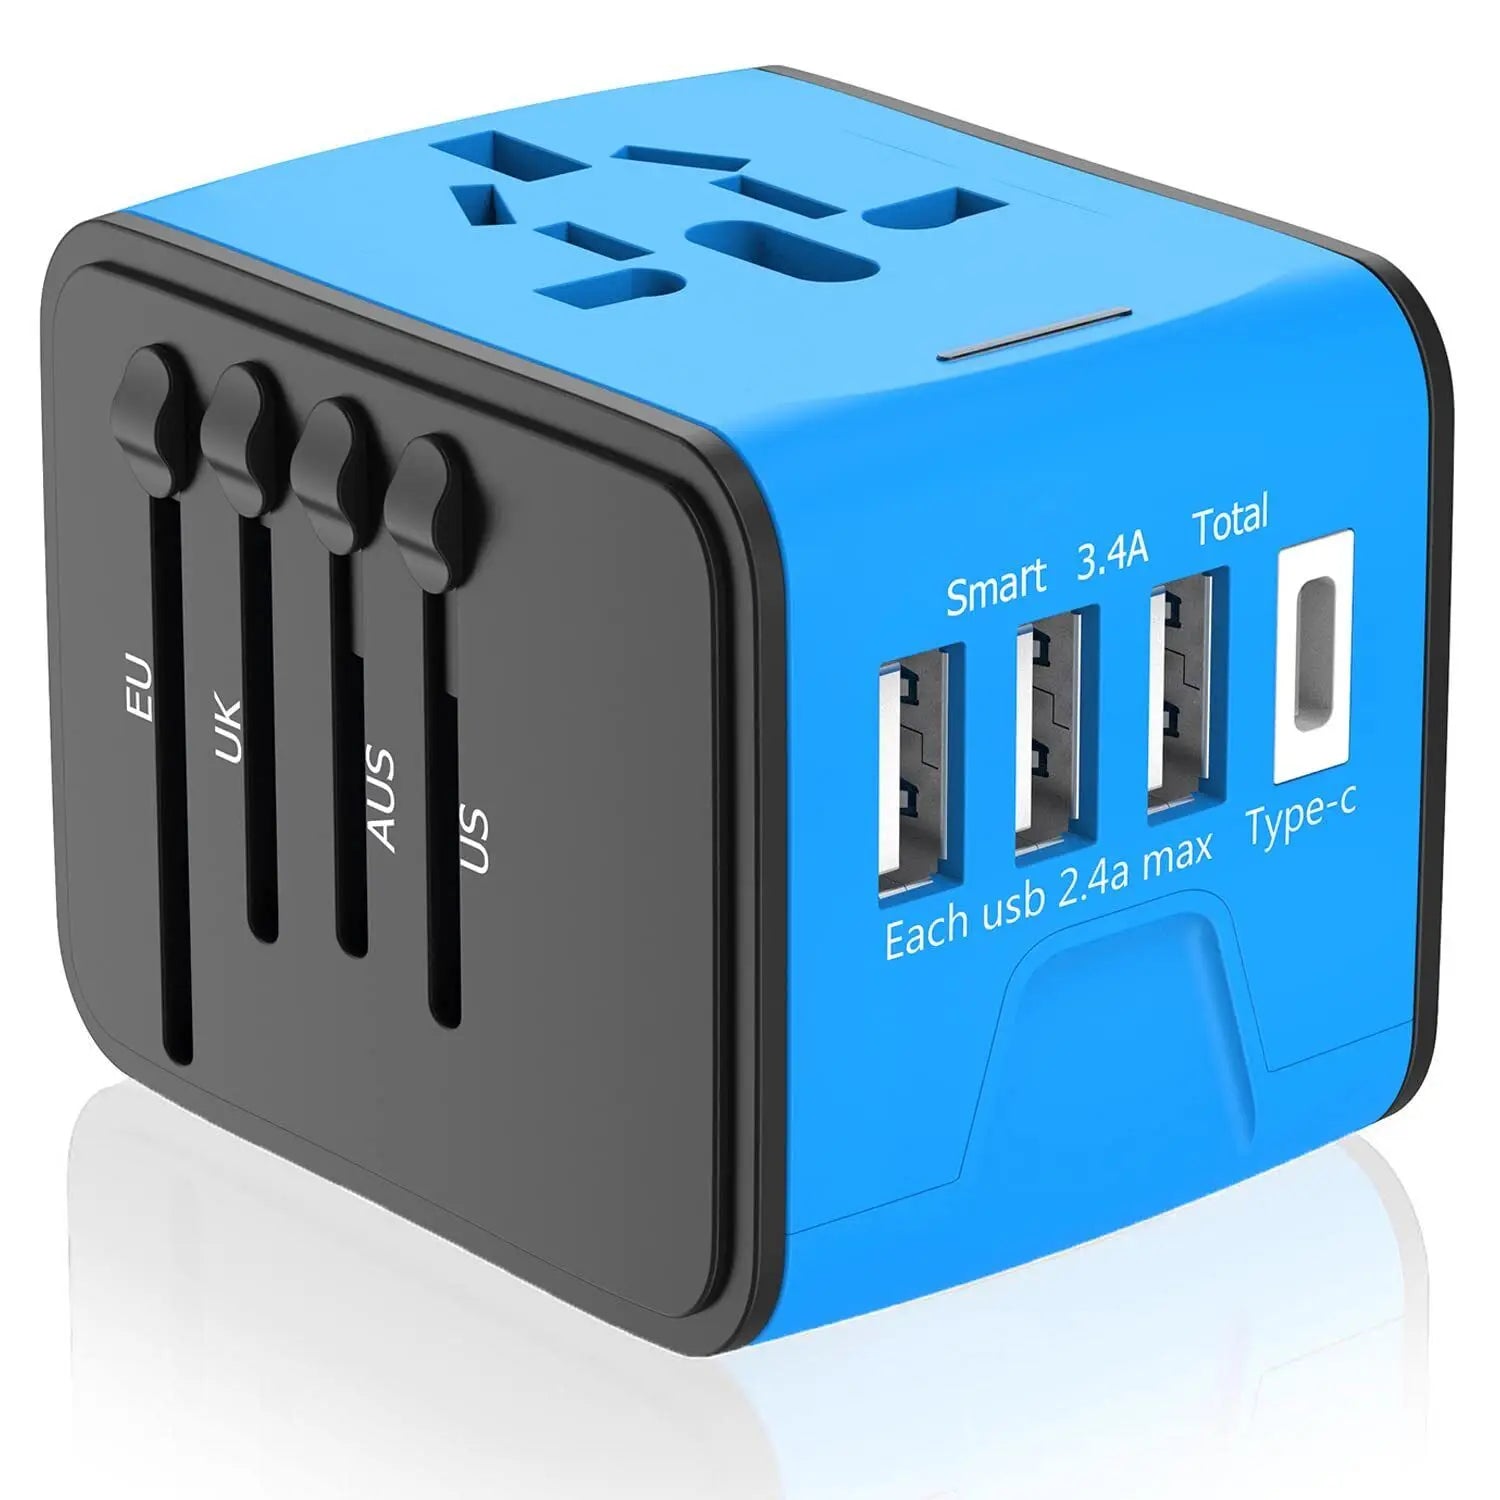 International Universal Travel Adapter 3 USB &Type-C Outlet Converter Plug Power Adapter Plug Charger